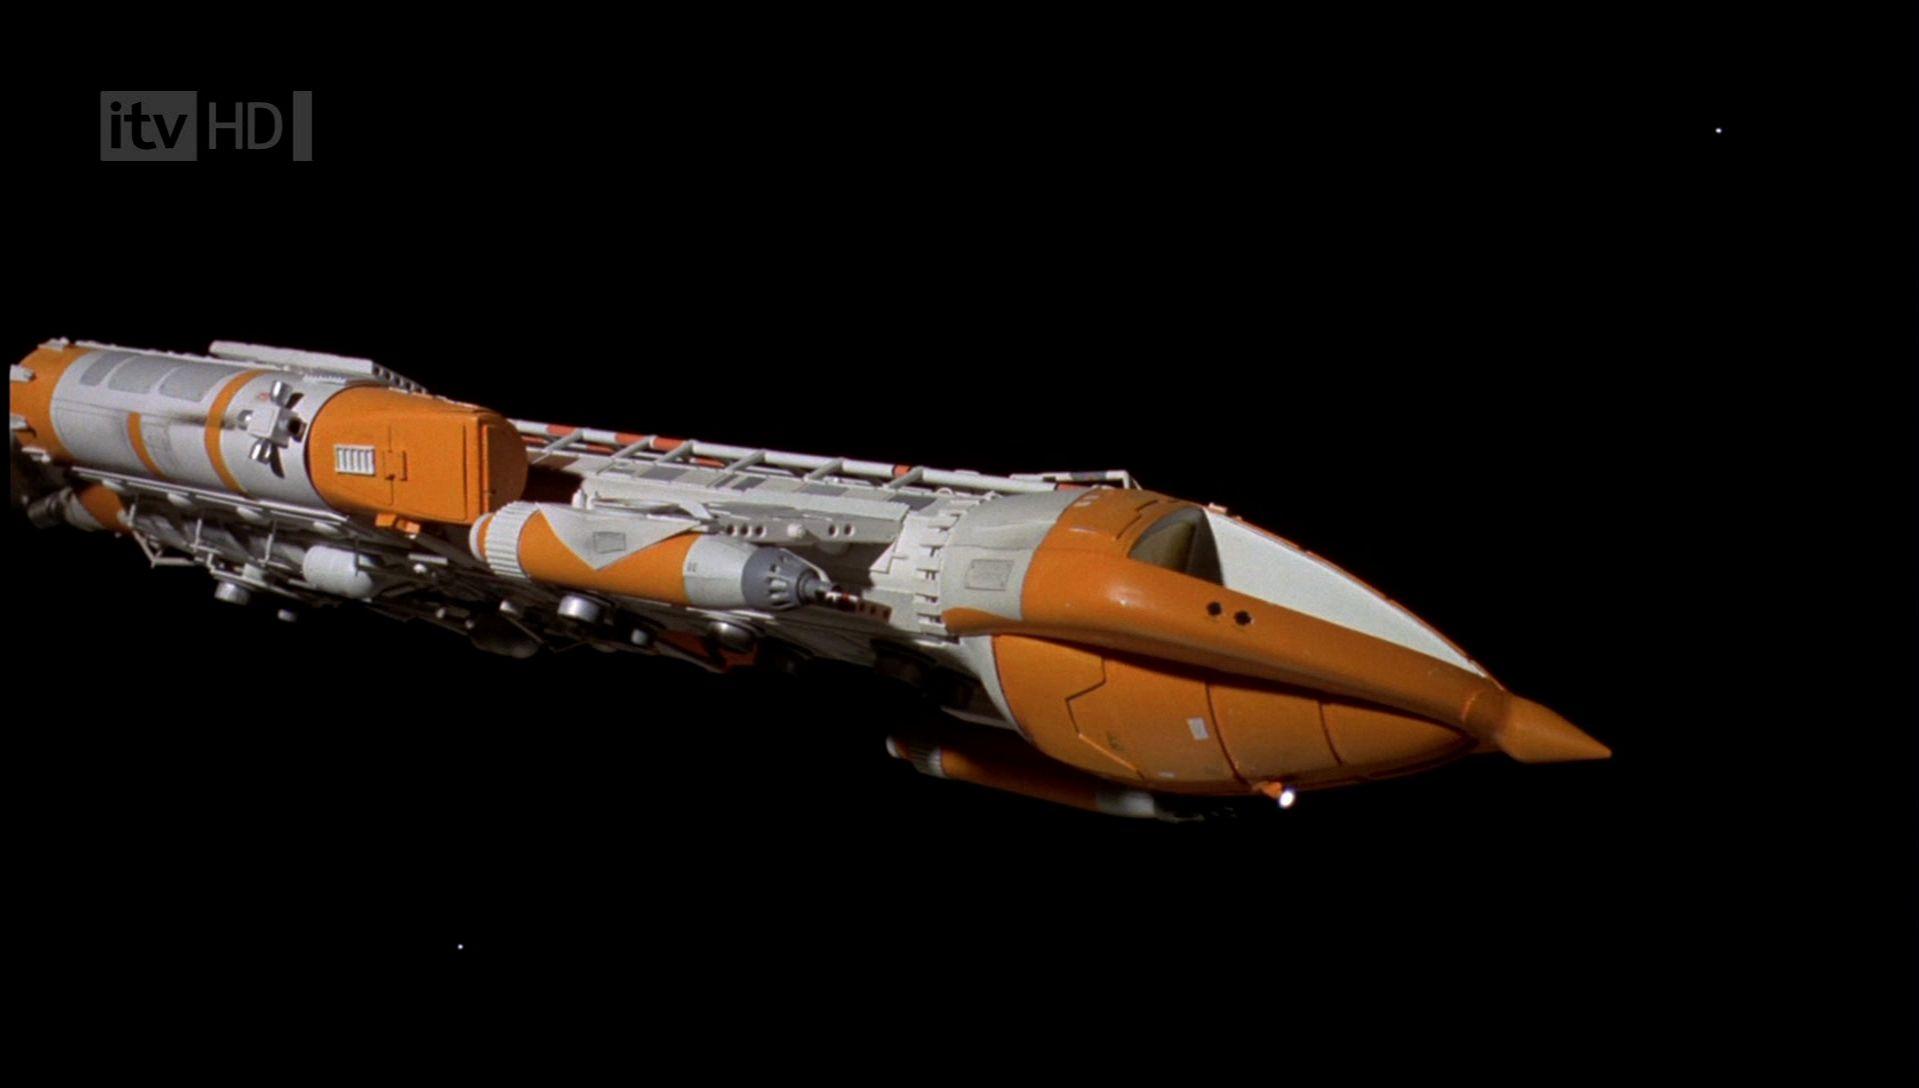 Space 1999 in HD